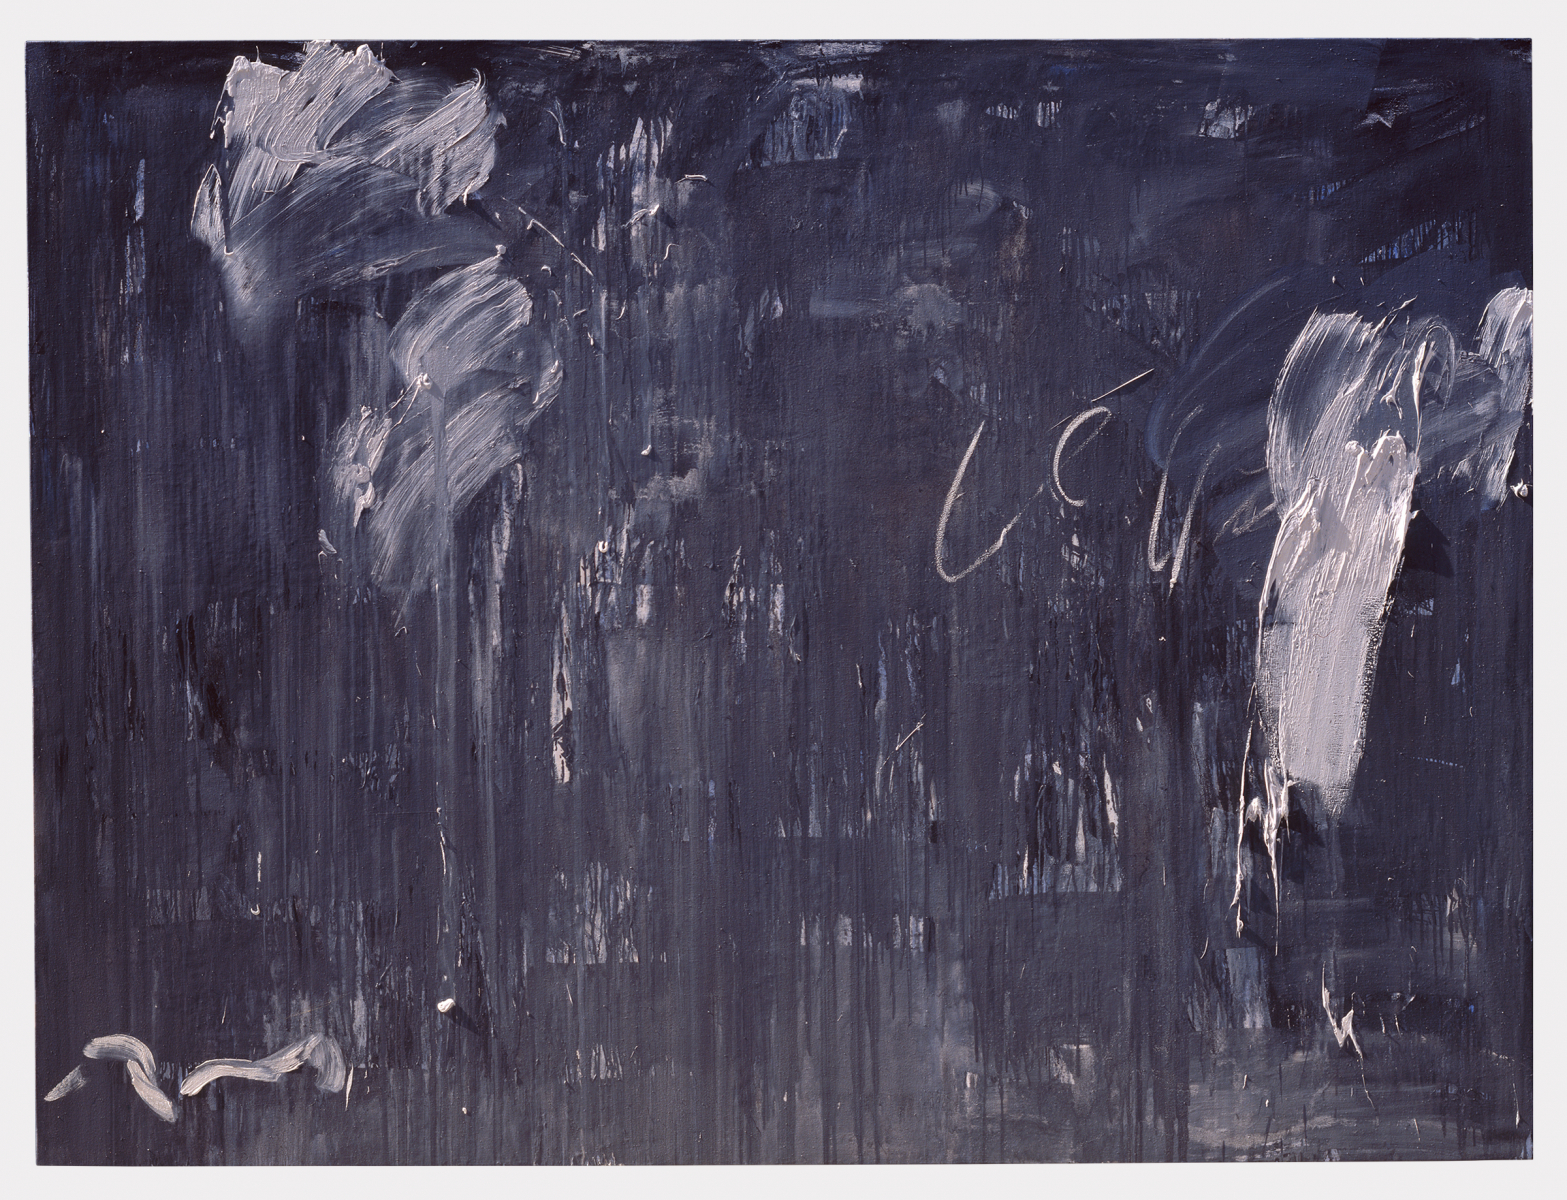 Untitled-93009, 1993, Oil on Canvas, 194x259cm